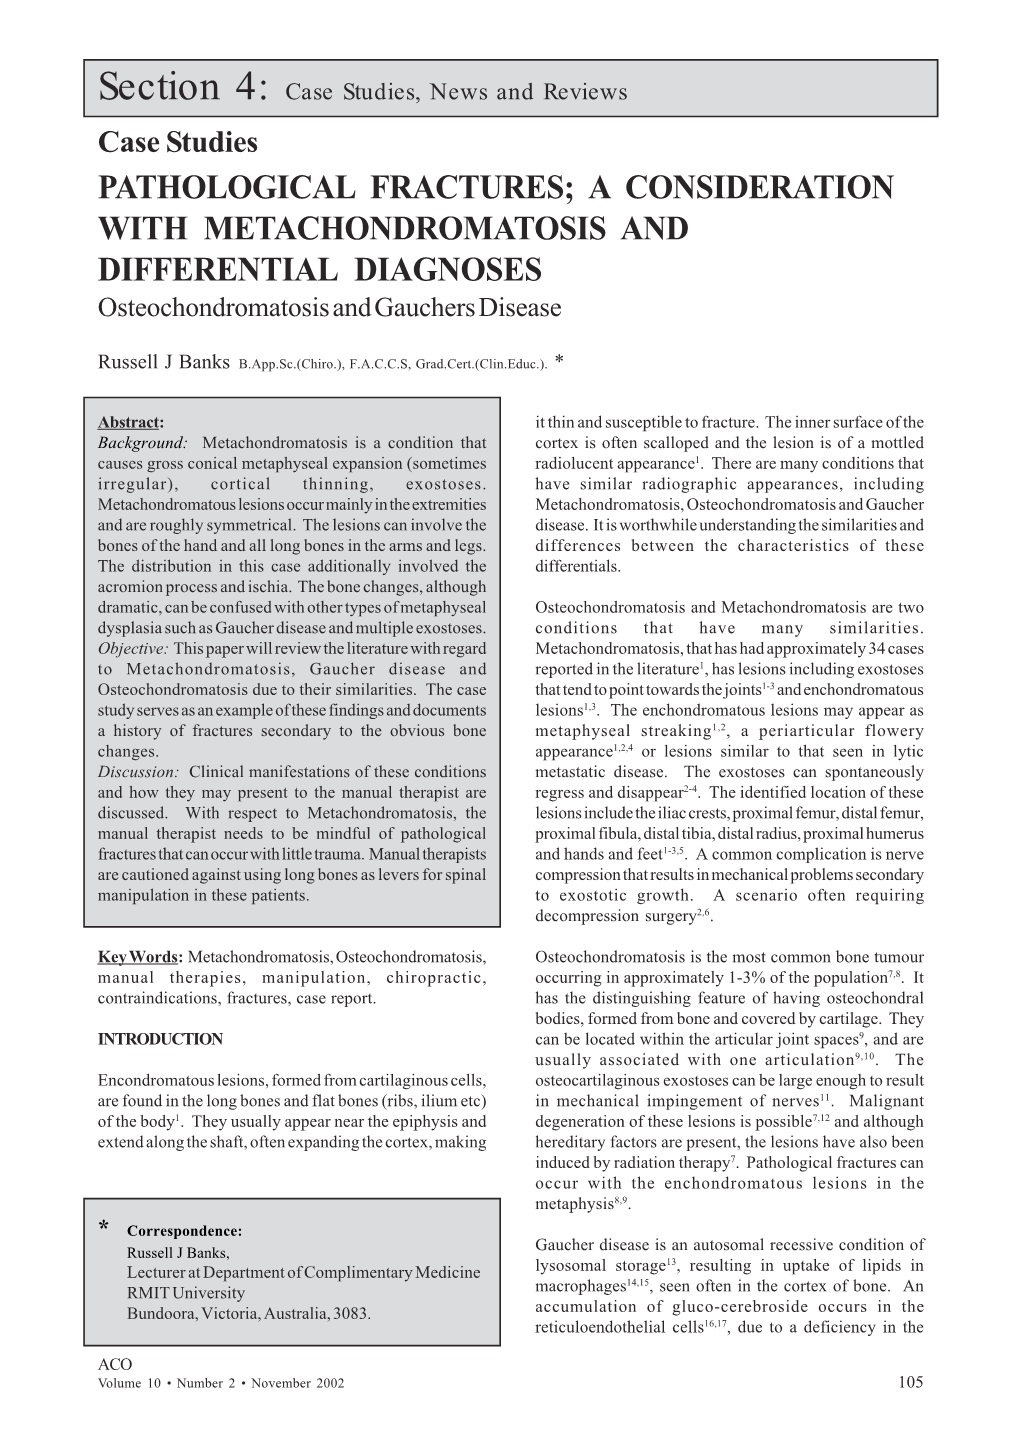 PATHOLOGICAL FRACTURES; a CONSIDERATION with METACHONDROMATOSIS and DIFFERENTIAL DIAGNOSES Osteochondromatosis and Gauchers Disease